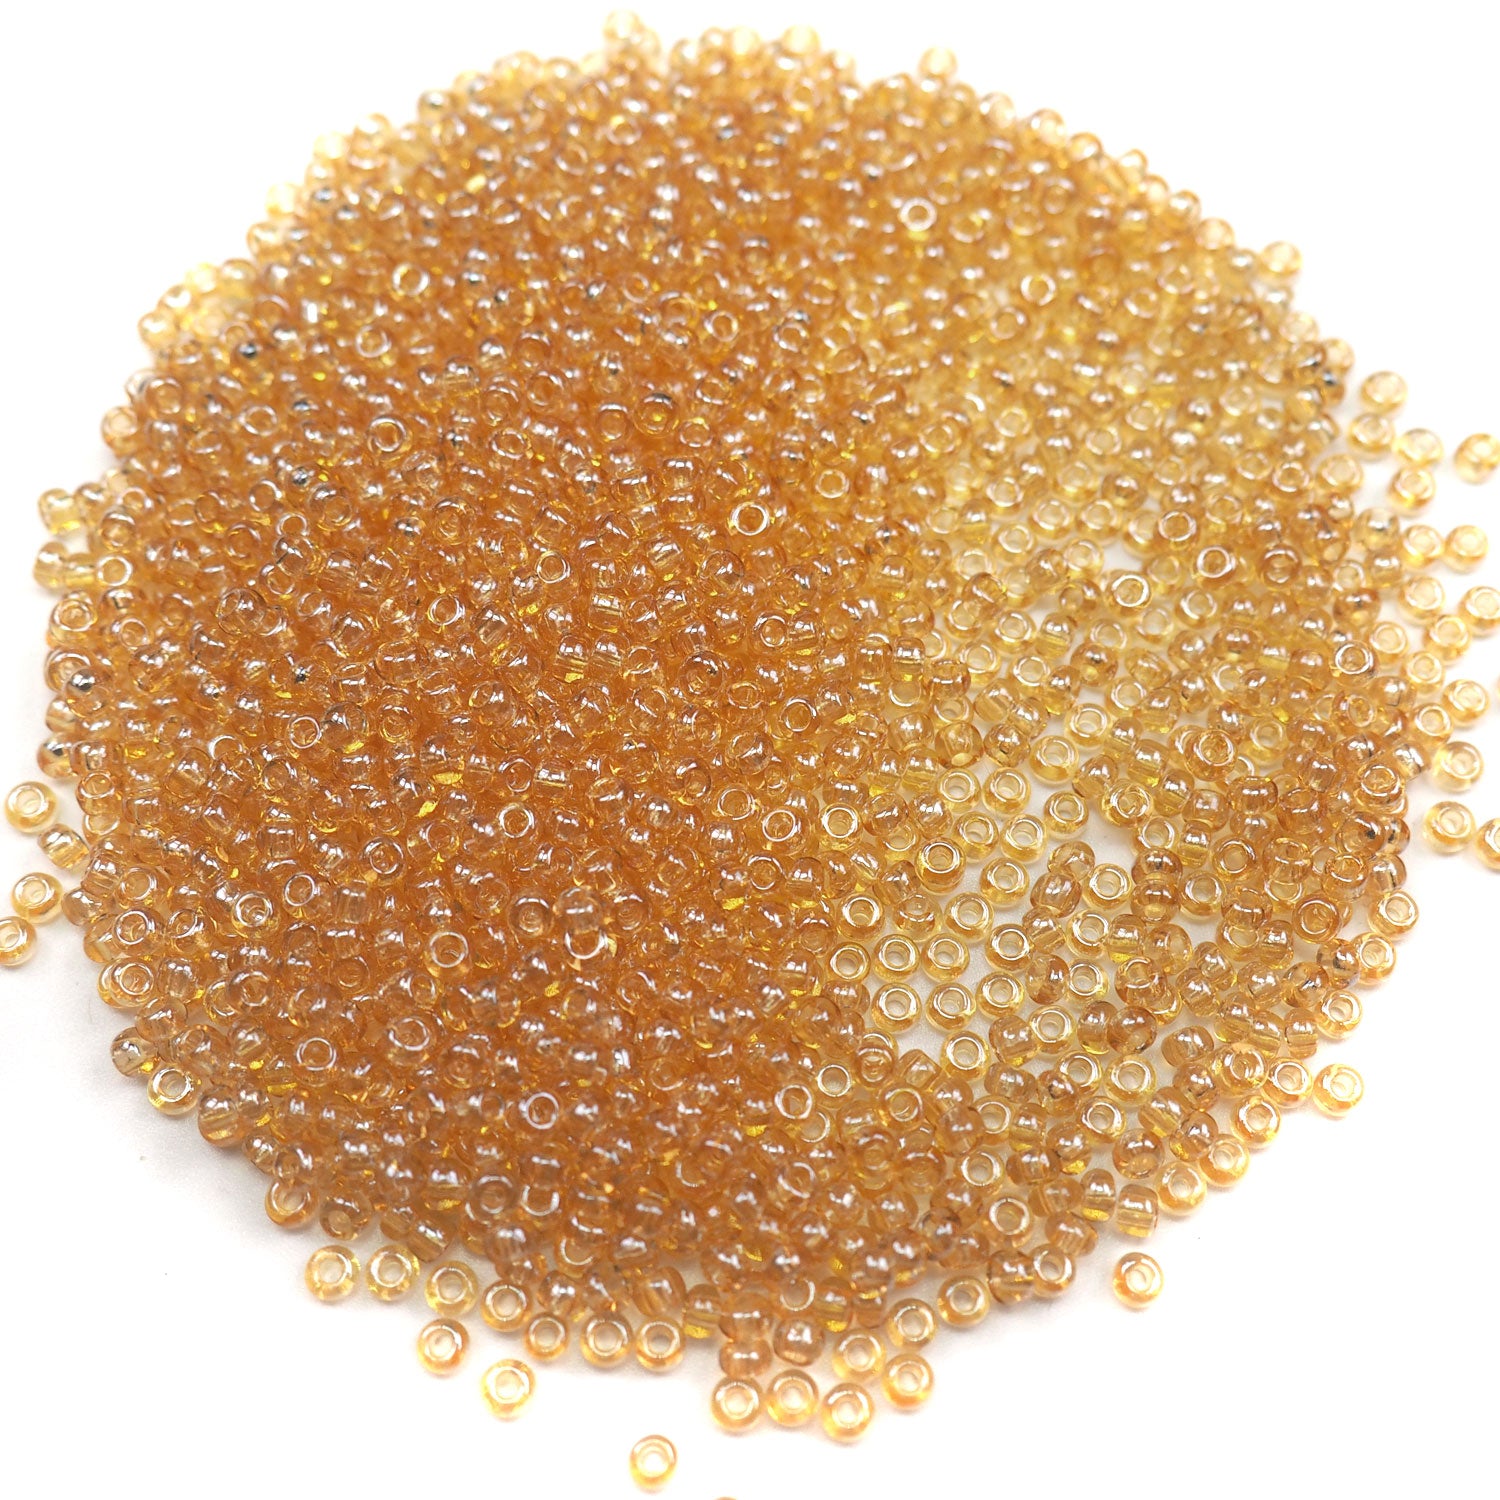 Rocailles size 9/0 (2.6mm) Light Topaz Brown Transparent Luster coated, Preciosa Ornela Traditional Czech Glass Seed Beads, 30grams (1 oz), P927